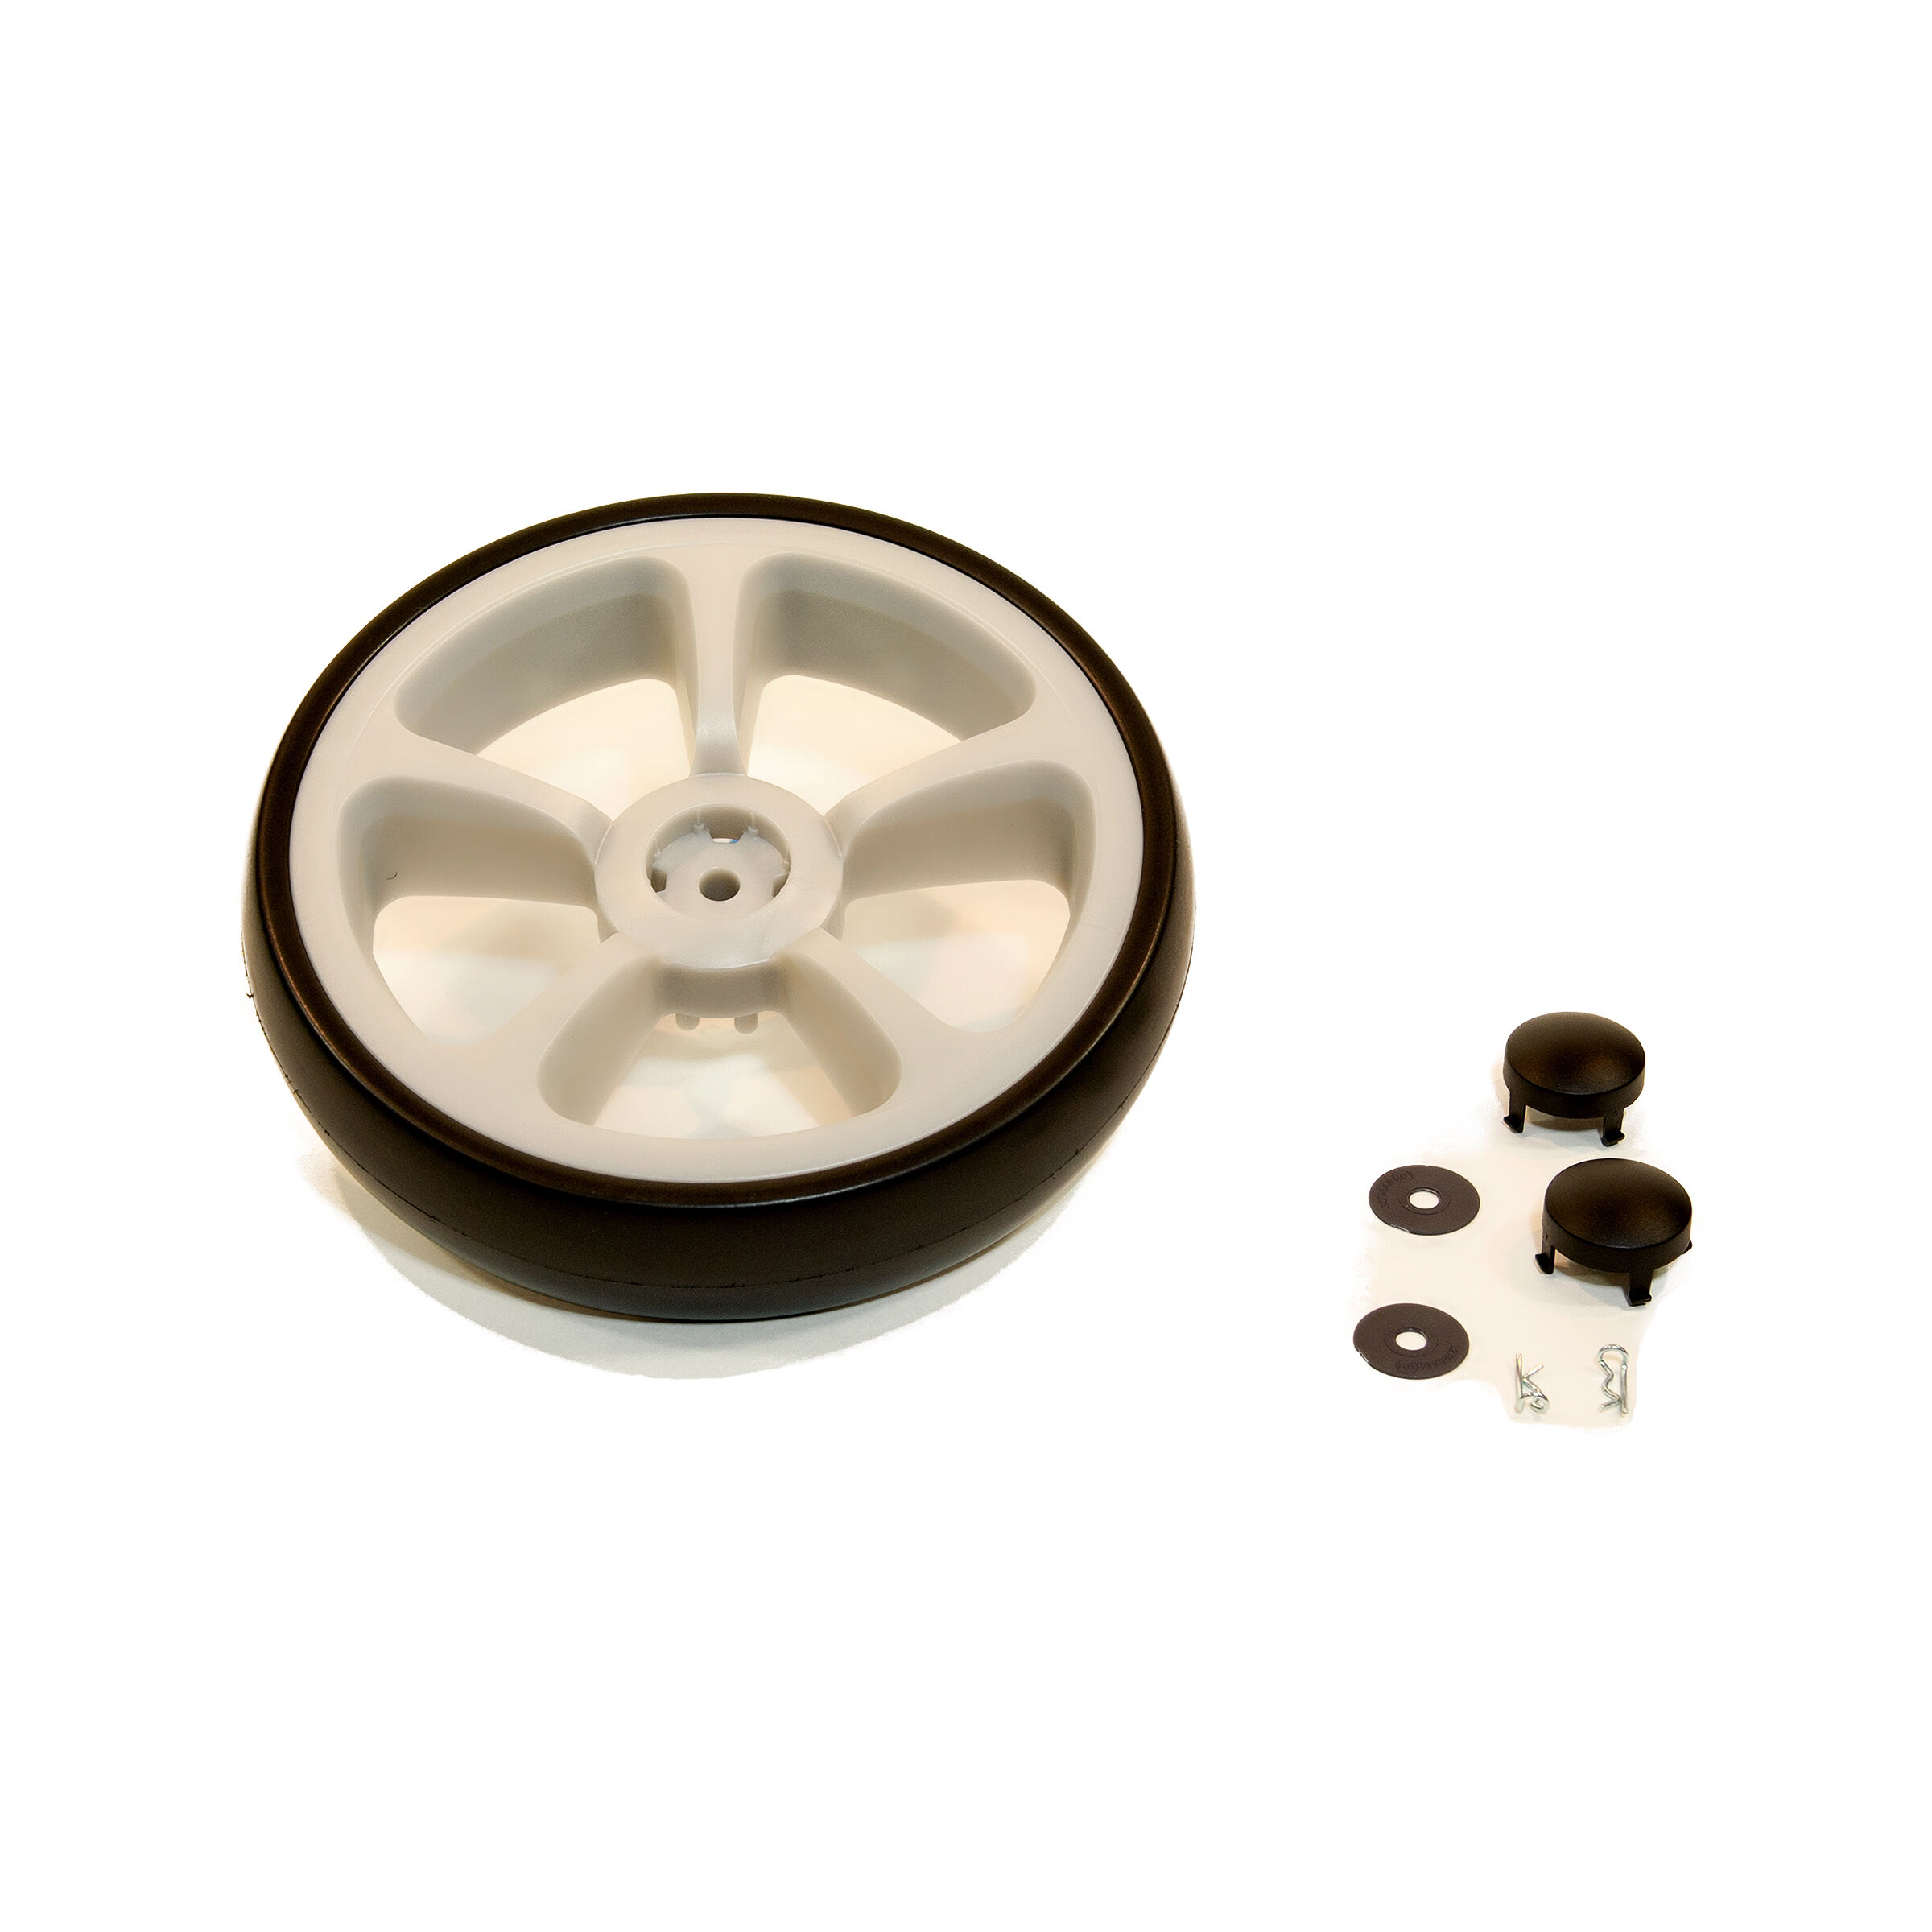 stroller replacement wheels